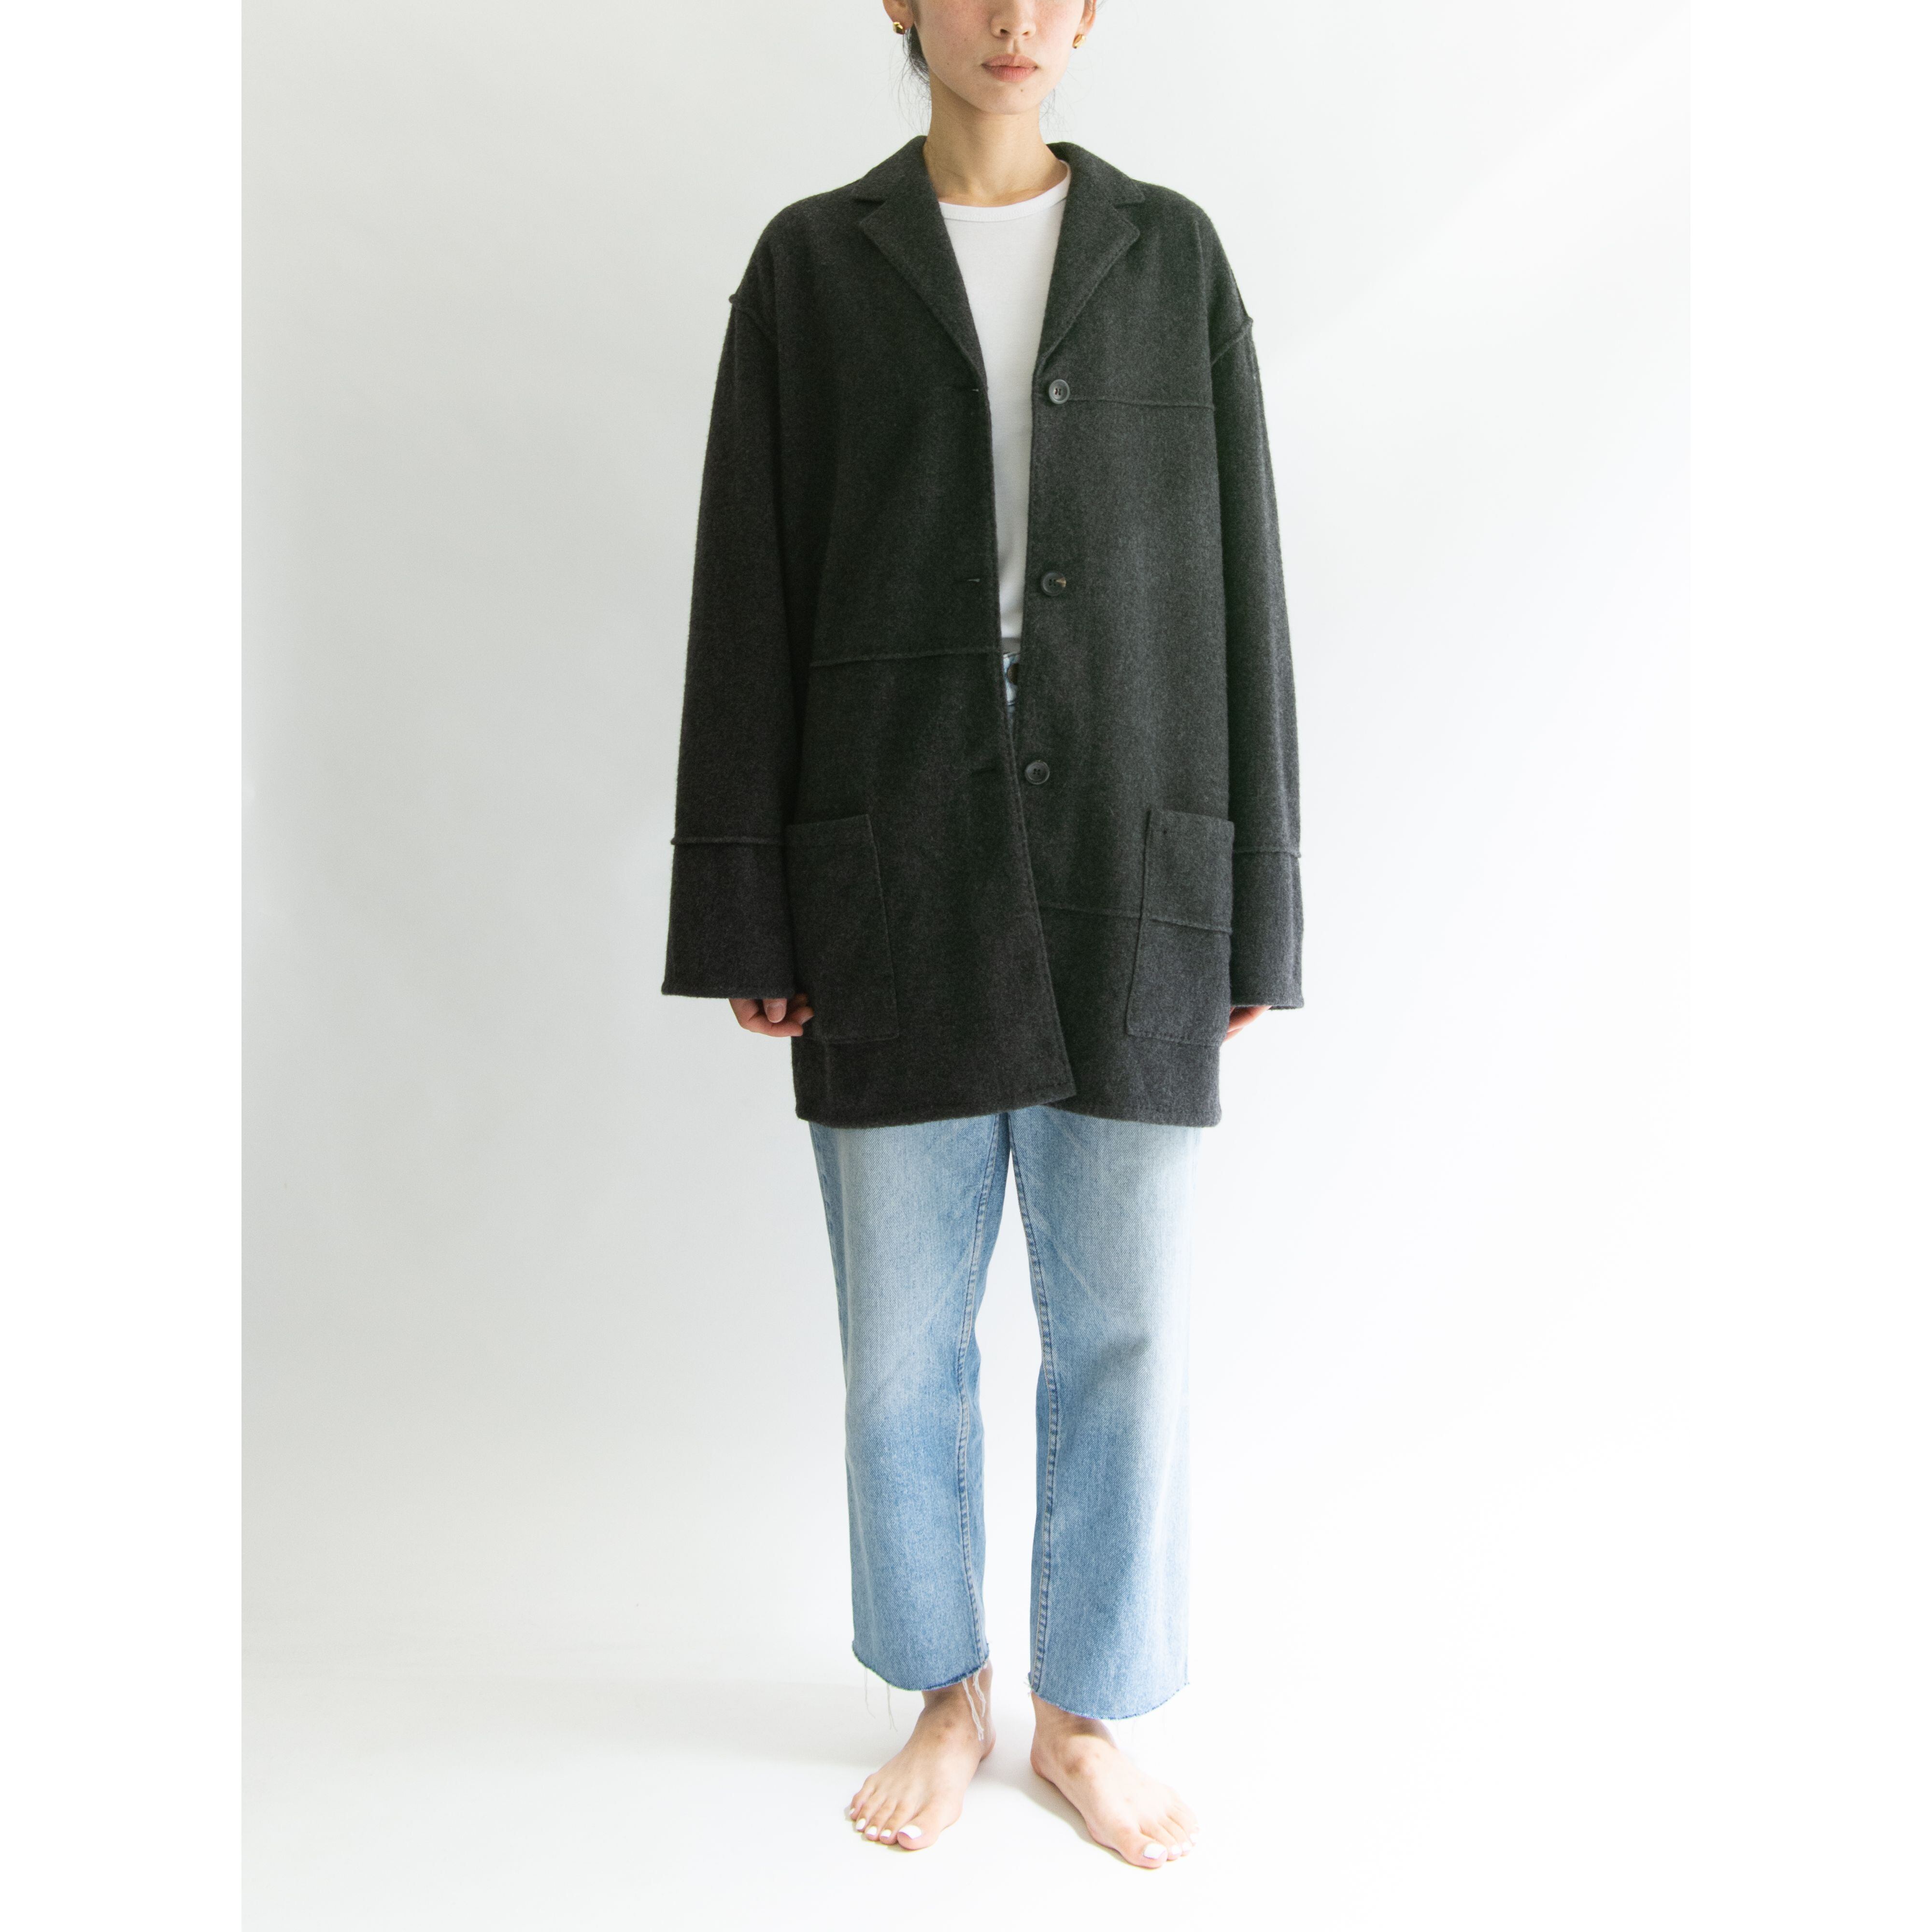 【Made in Italy】Pure cashmere oversized jacket（イタリア製 ピュアカシミヤ オーバーサイズジャケット）10d